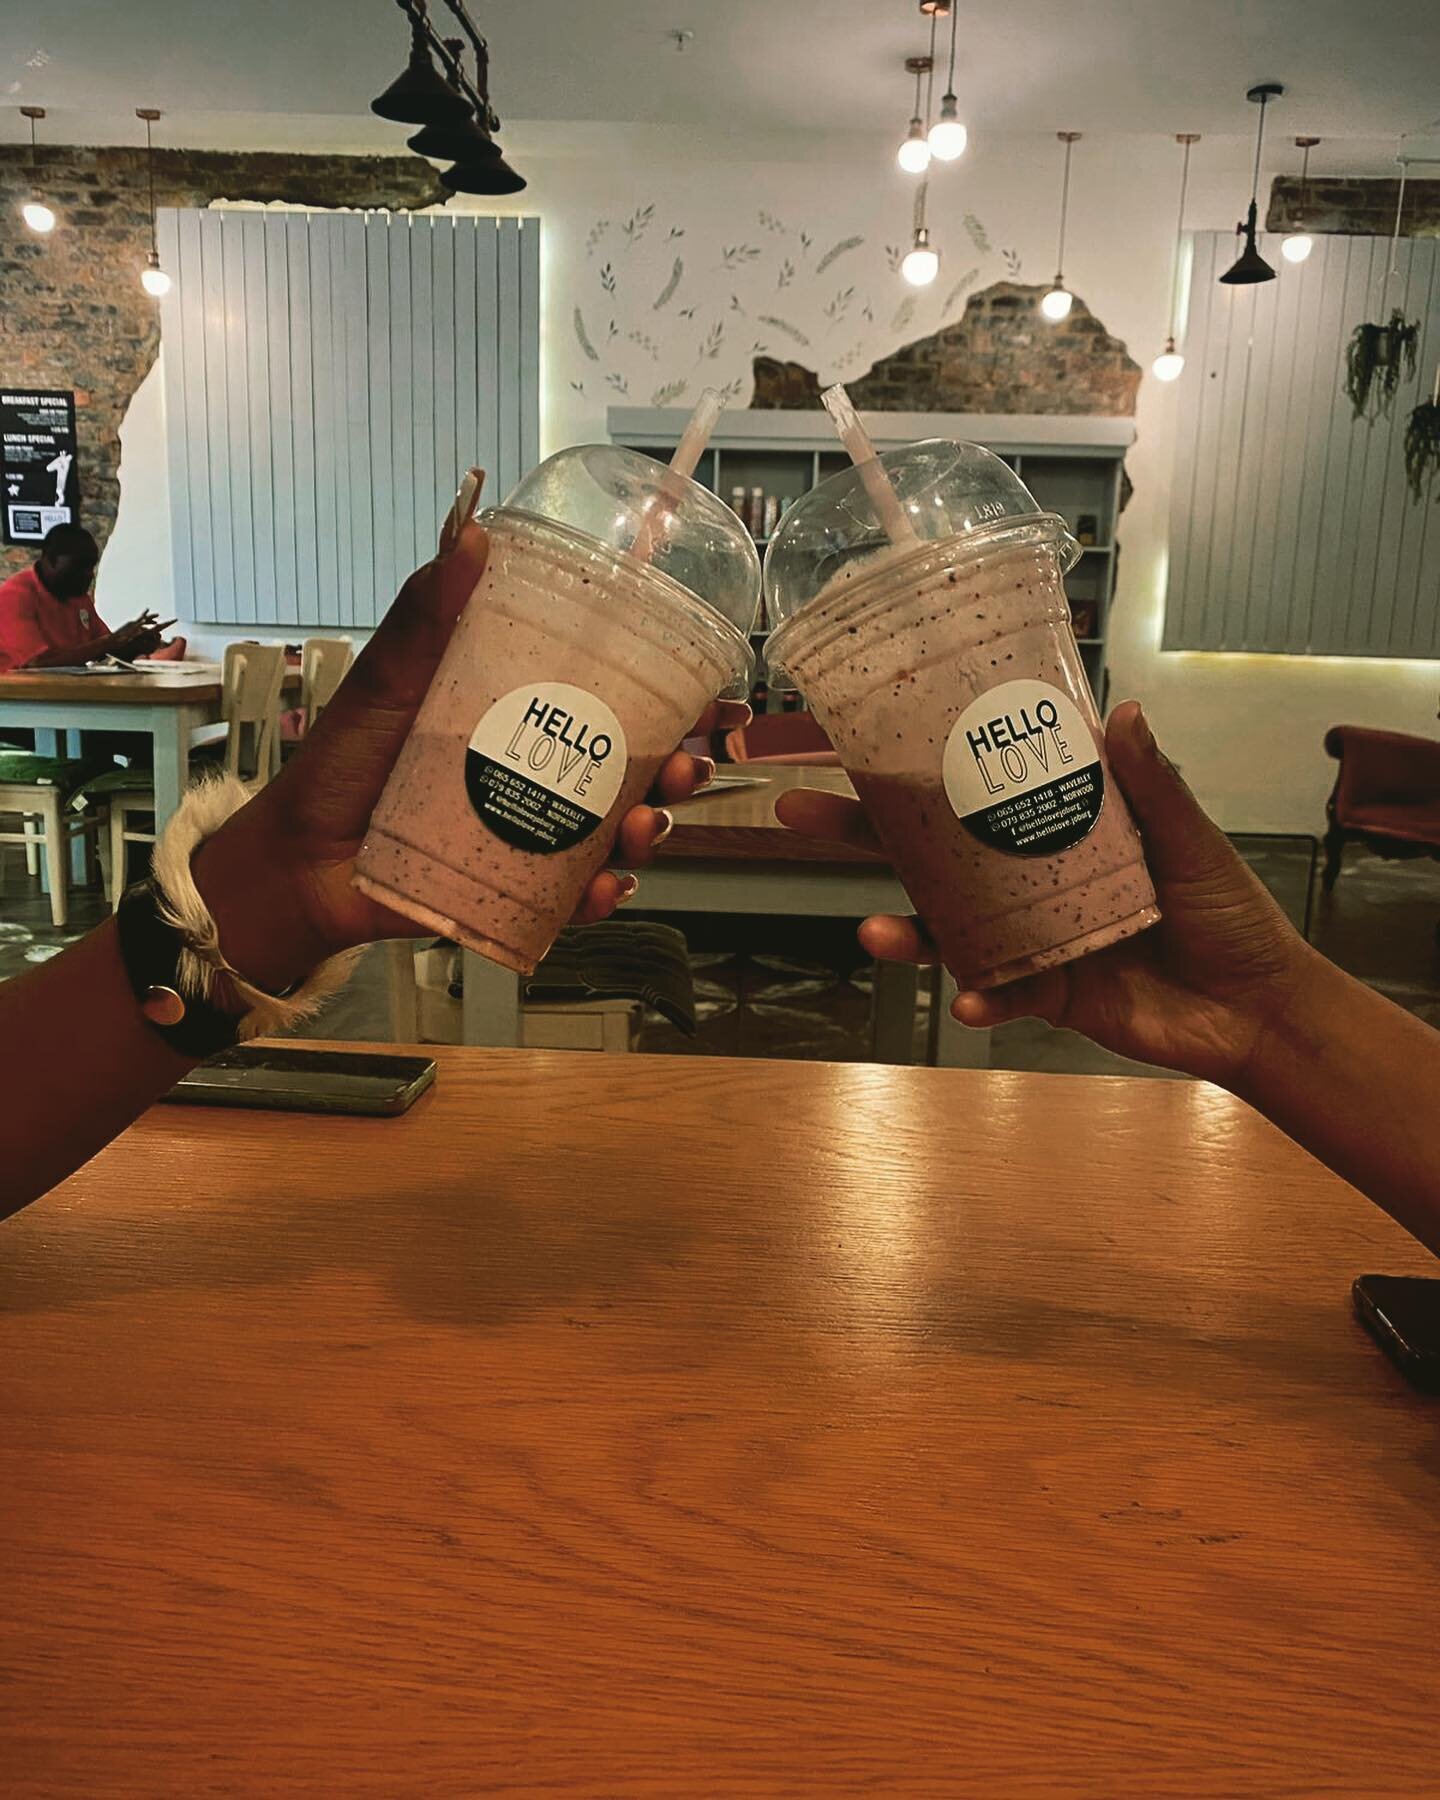 Cheers to the almost weekend!
#berrybanger #norwoodmall 
📸 @bxngxnx